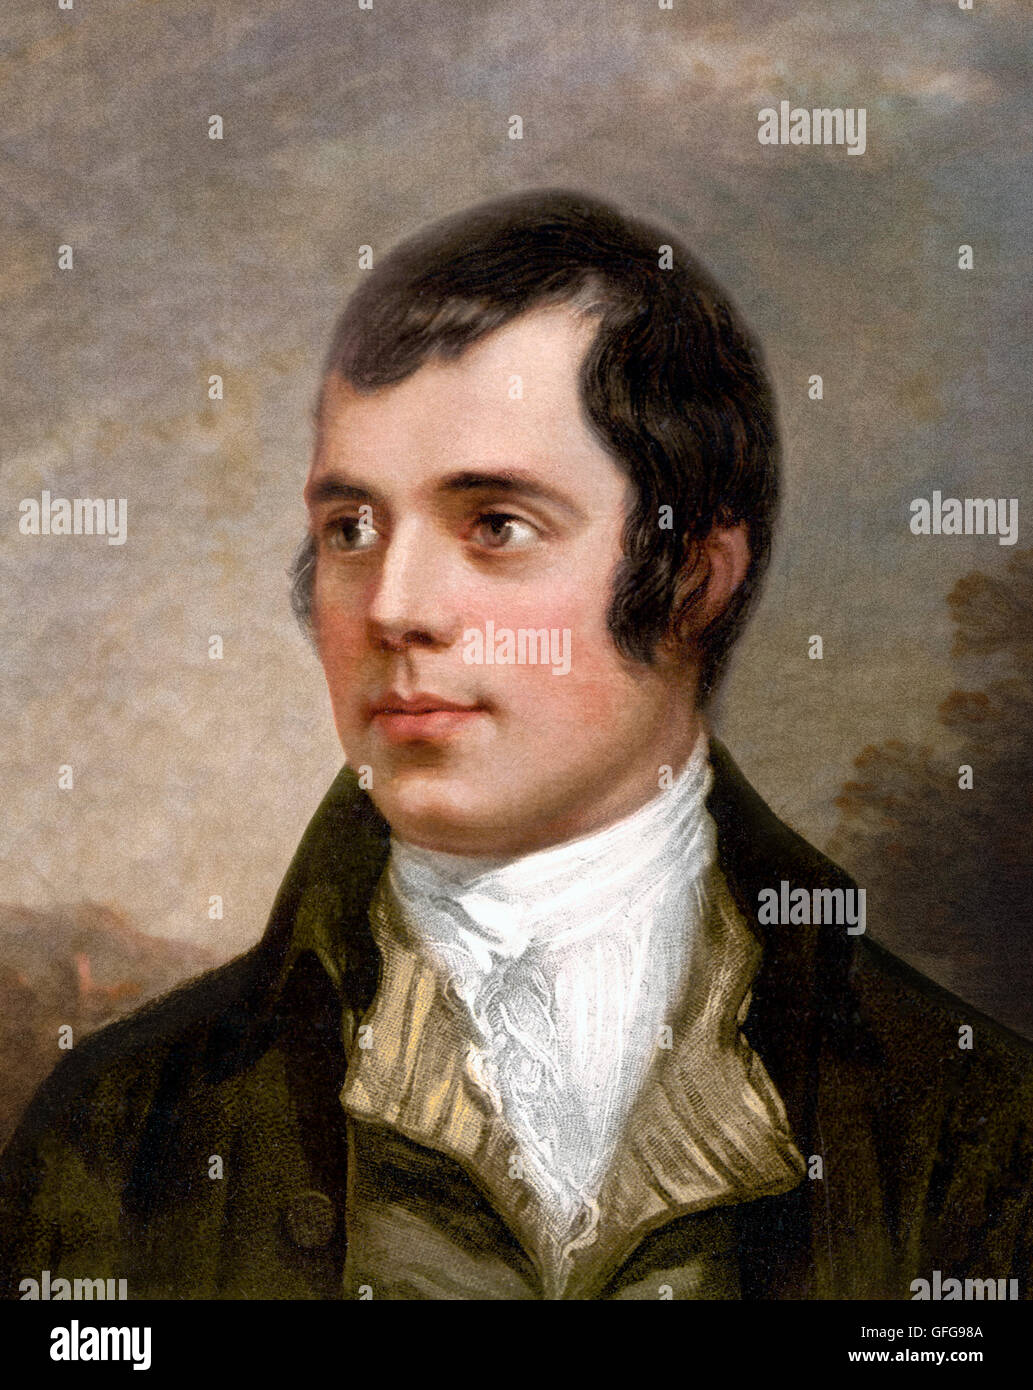 Robert Burns. Portrait of the 18thC Scottish poet, Robert Burns (1759-1796), also known as Rabbie Burns. Based on a photomechanical print, c.1890-1900, from a painting by Alexander Nasmyth, 1787. Stock Photo